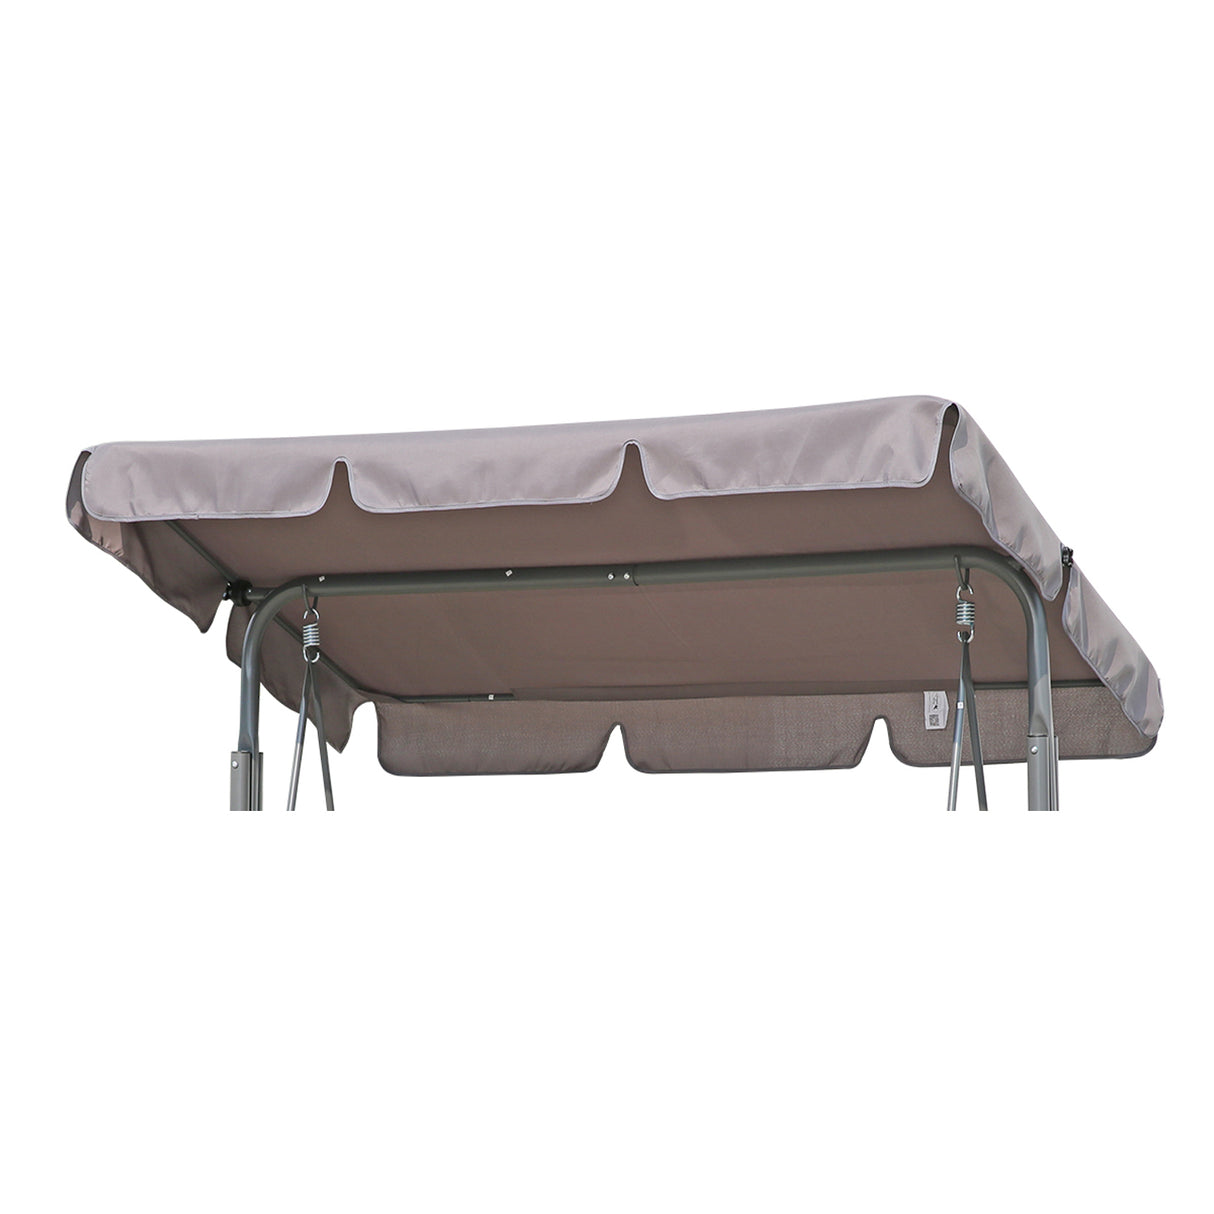 Angel Living Replacement Roof for Swing Chair 169x110cm Grey